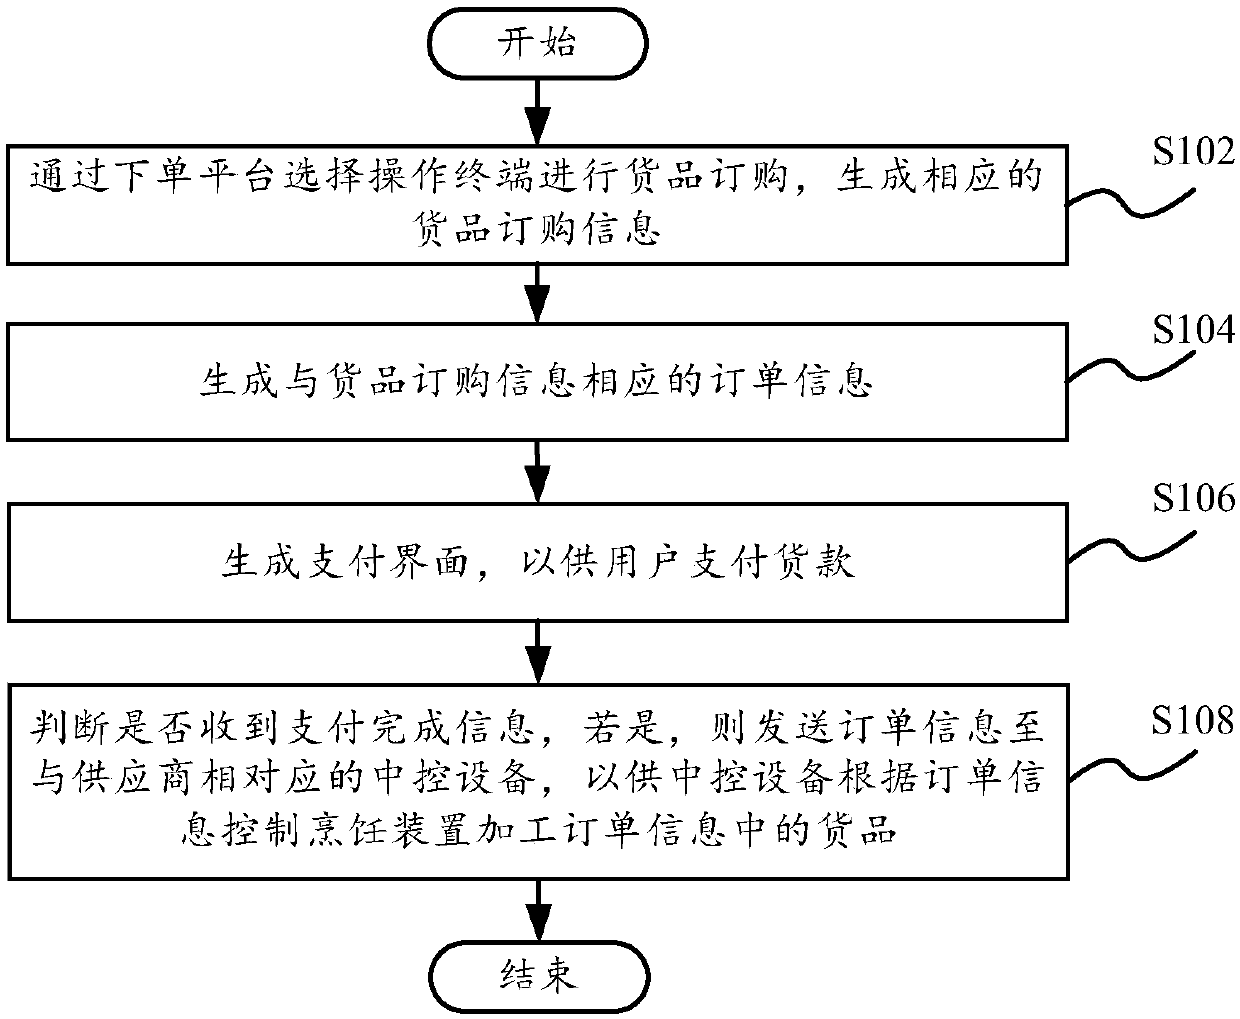 Order management method and system, and cooking control method and system